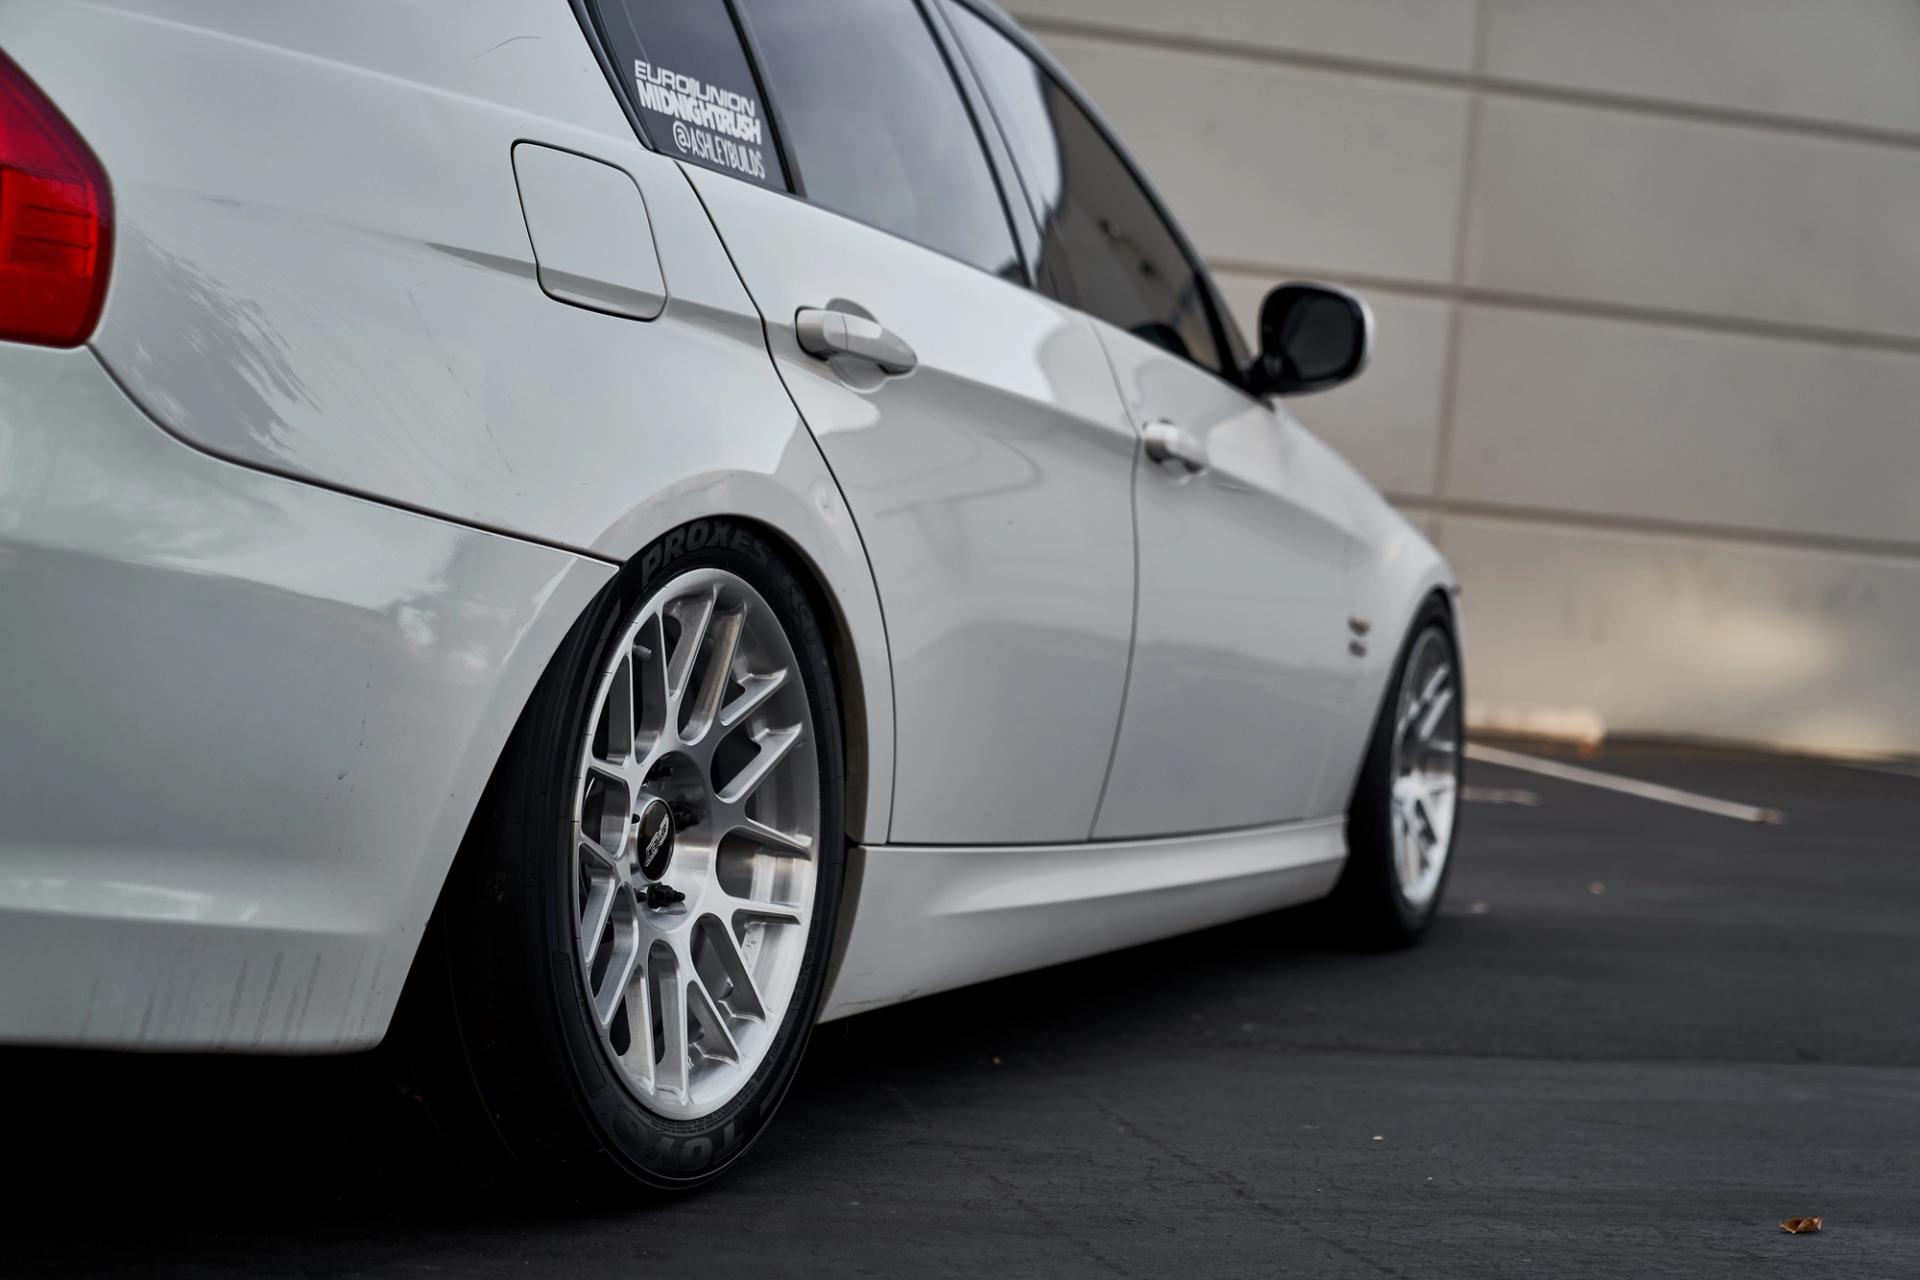 BMW E90 LCI Sedan 3 Series with 17" ARC-8R in Brushed Clear